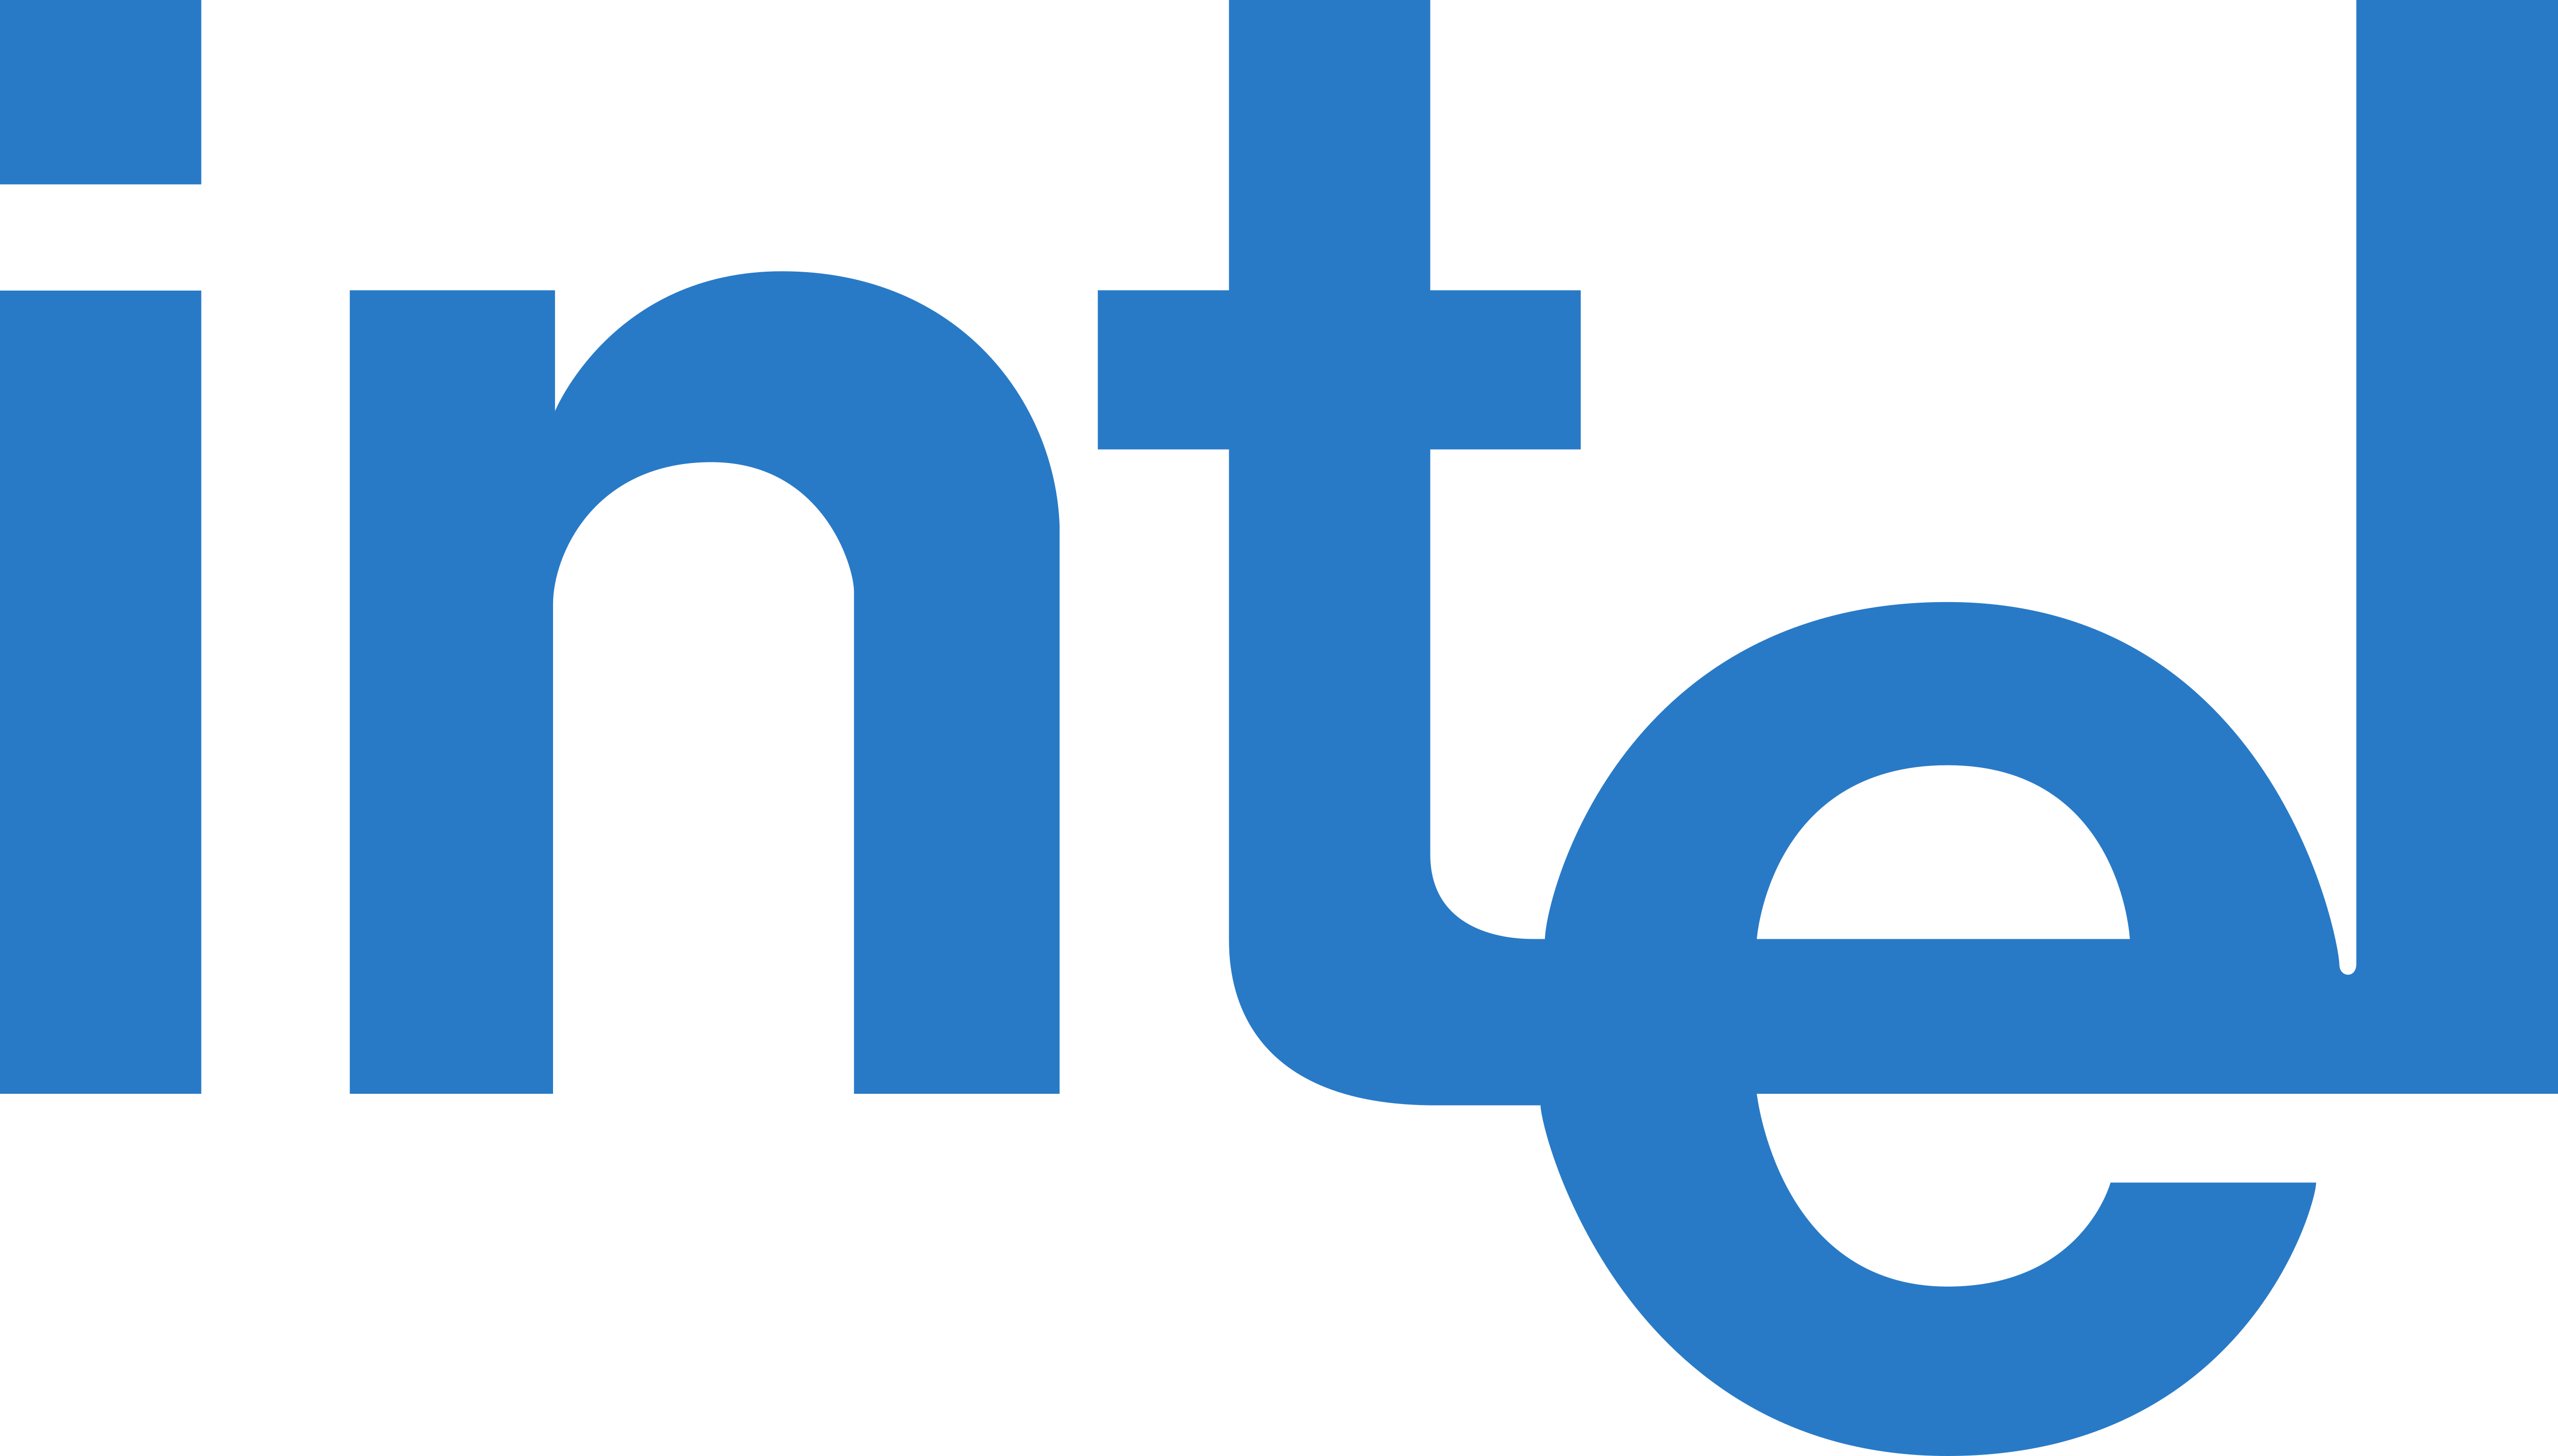 Intel Logo PNG Picture